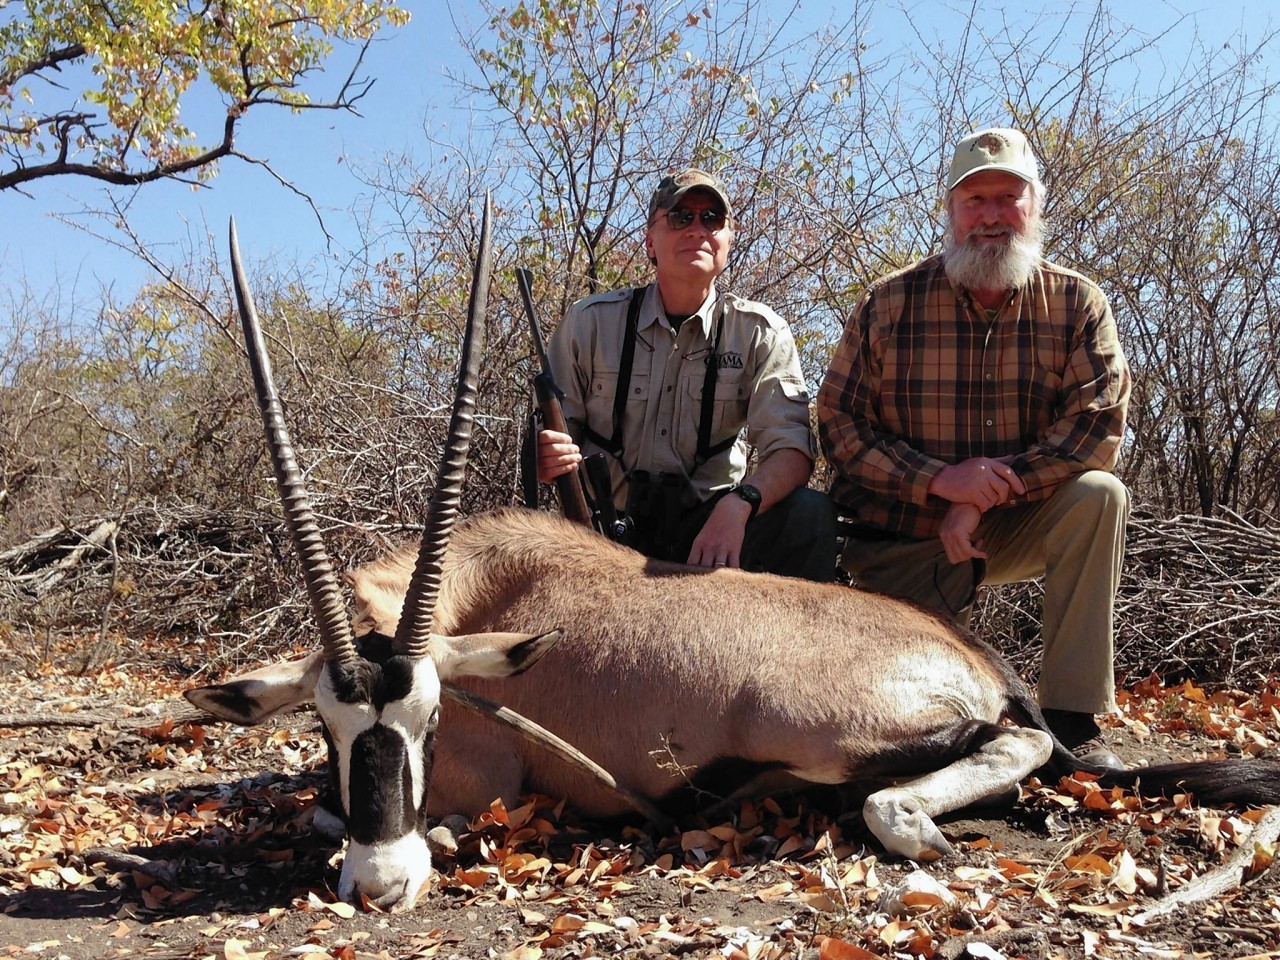 Peter Swales (right) on a hunt in Africa